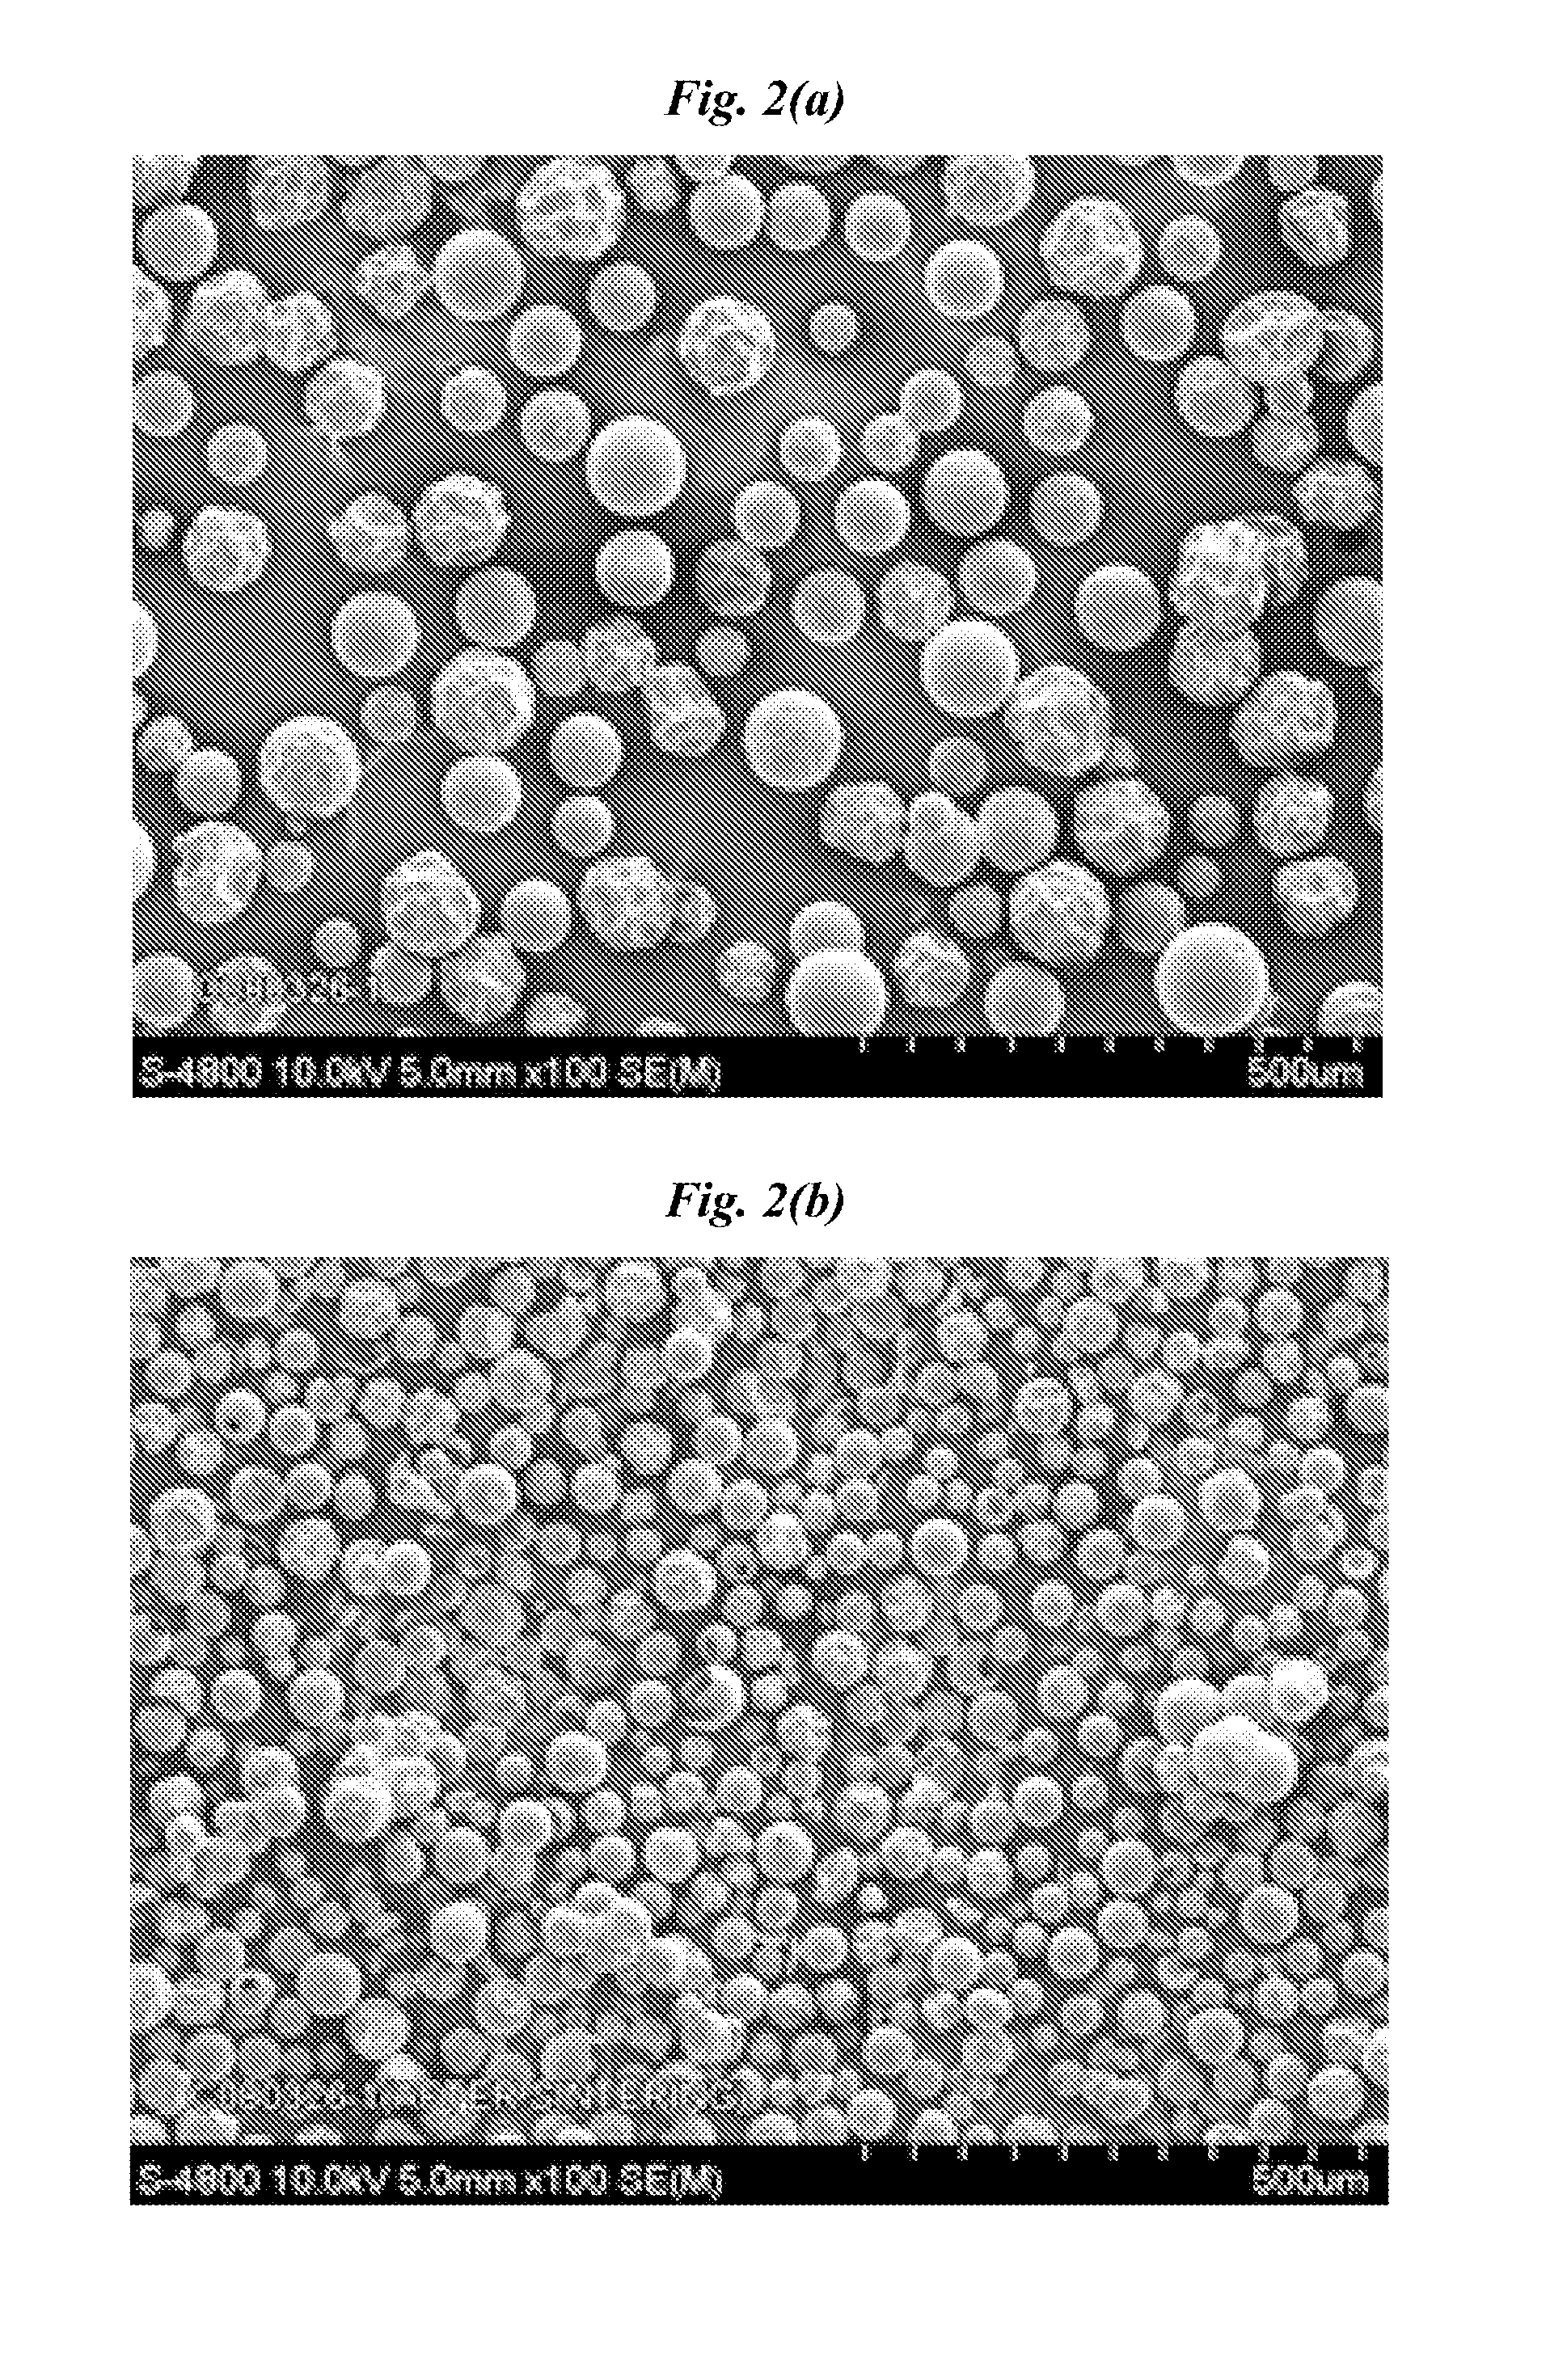 Supported Catalysts for Synthesizing Carbon Nanotubes, Method for Preparing the Same, and Carbon Nanotubes Made Using the Same